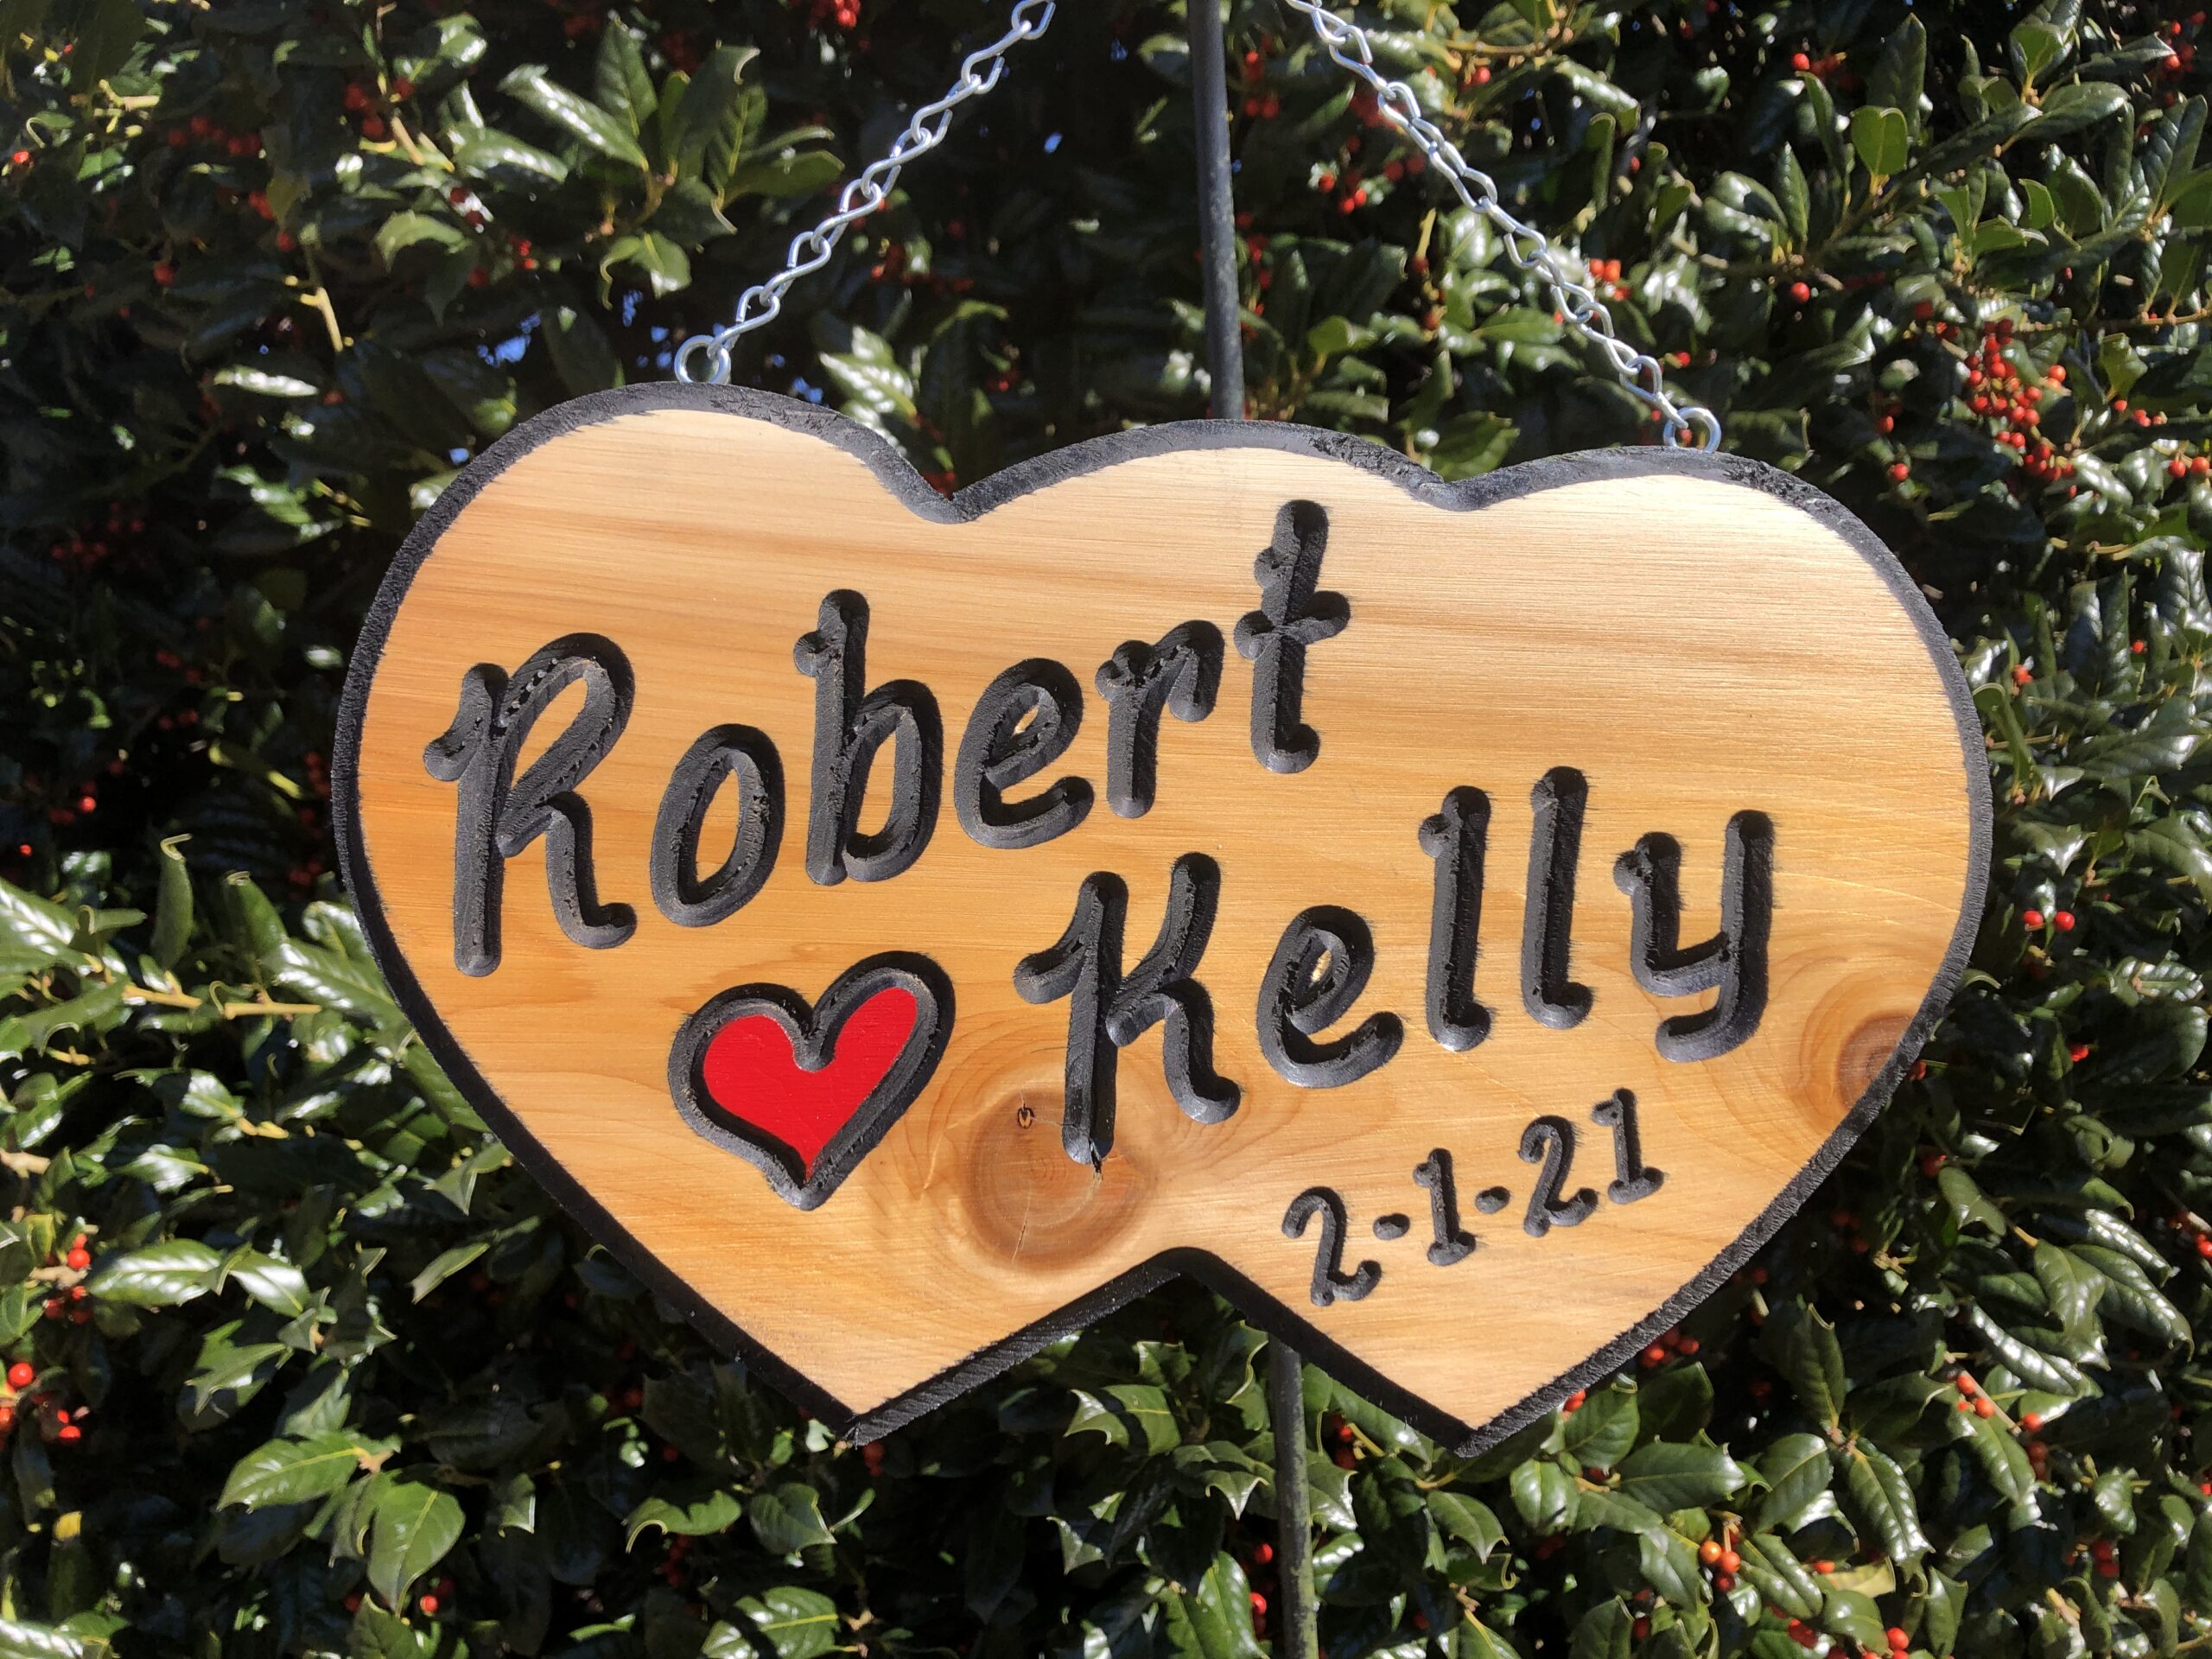 Personalised Wooden Wedding Heart Names and date cut into a love heart Valentines Day